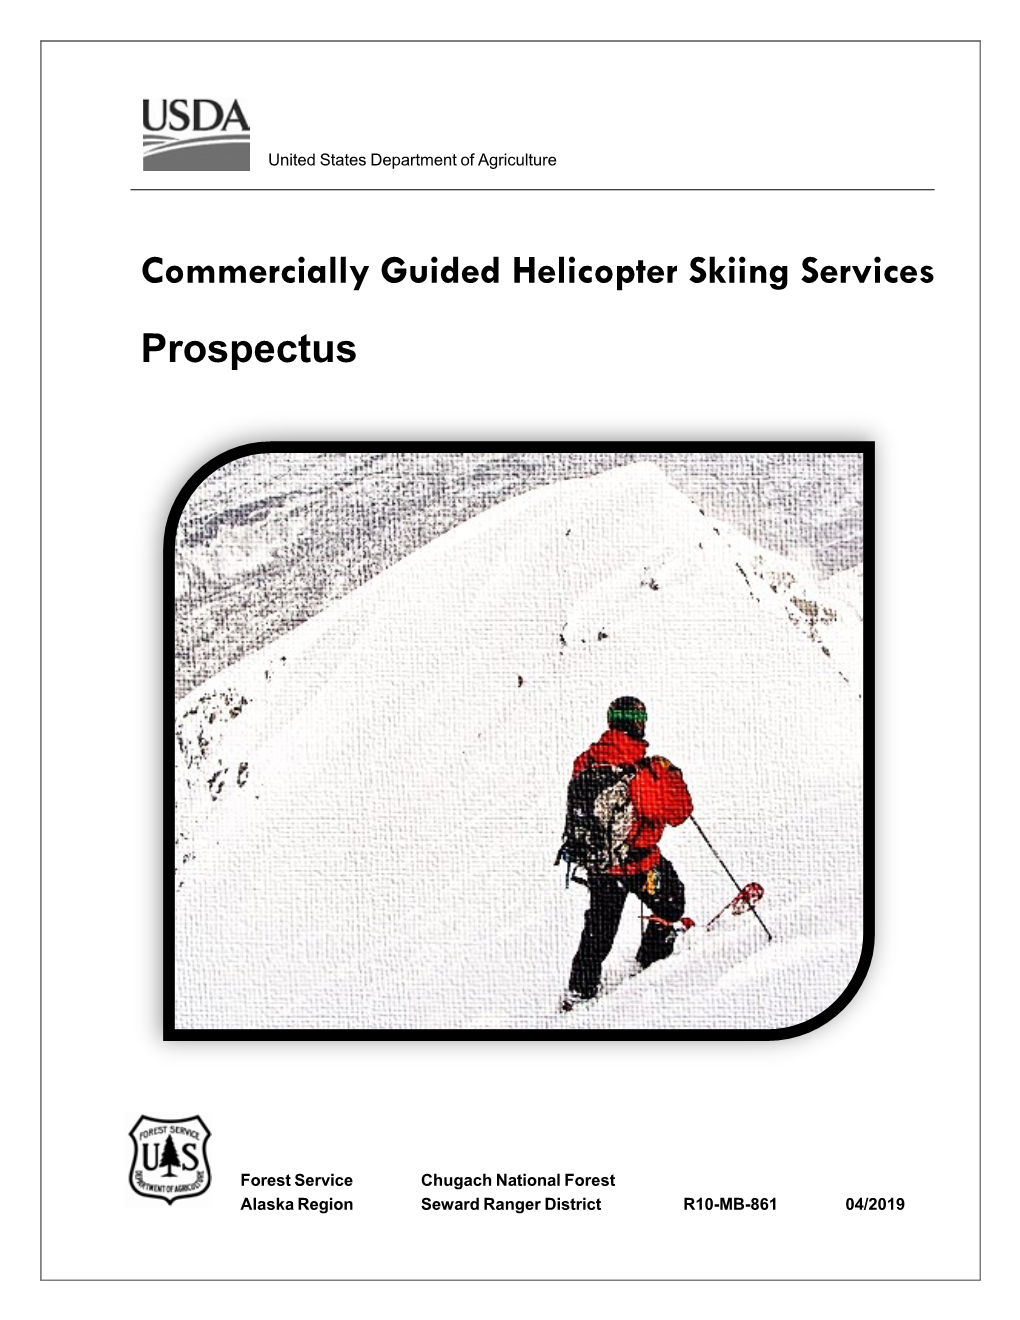 Commercially Guided Helicopter Skiing Services Prospectus